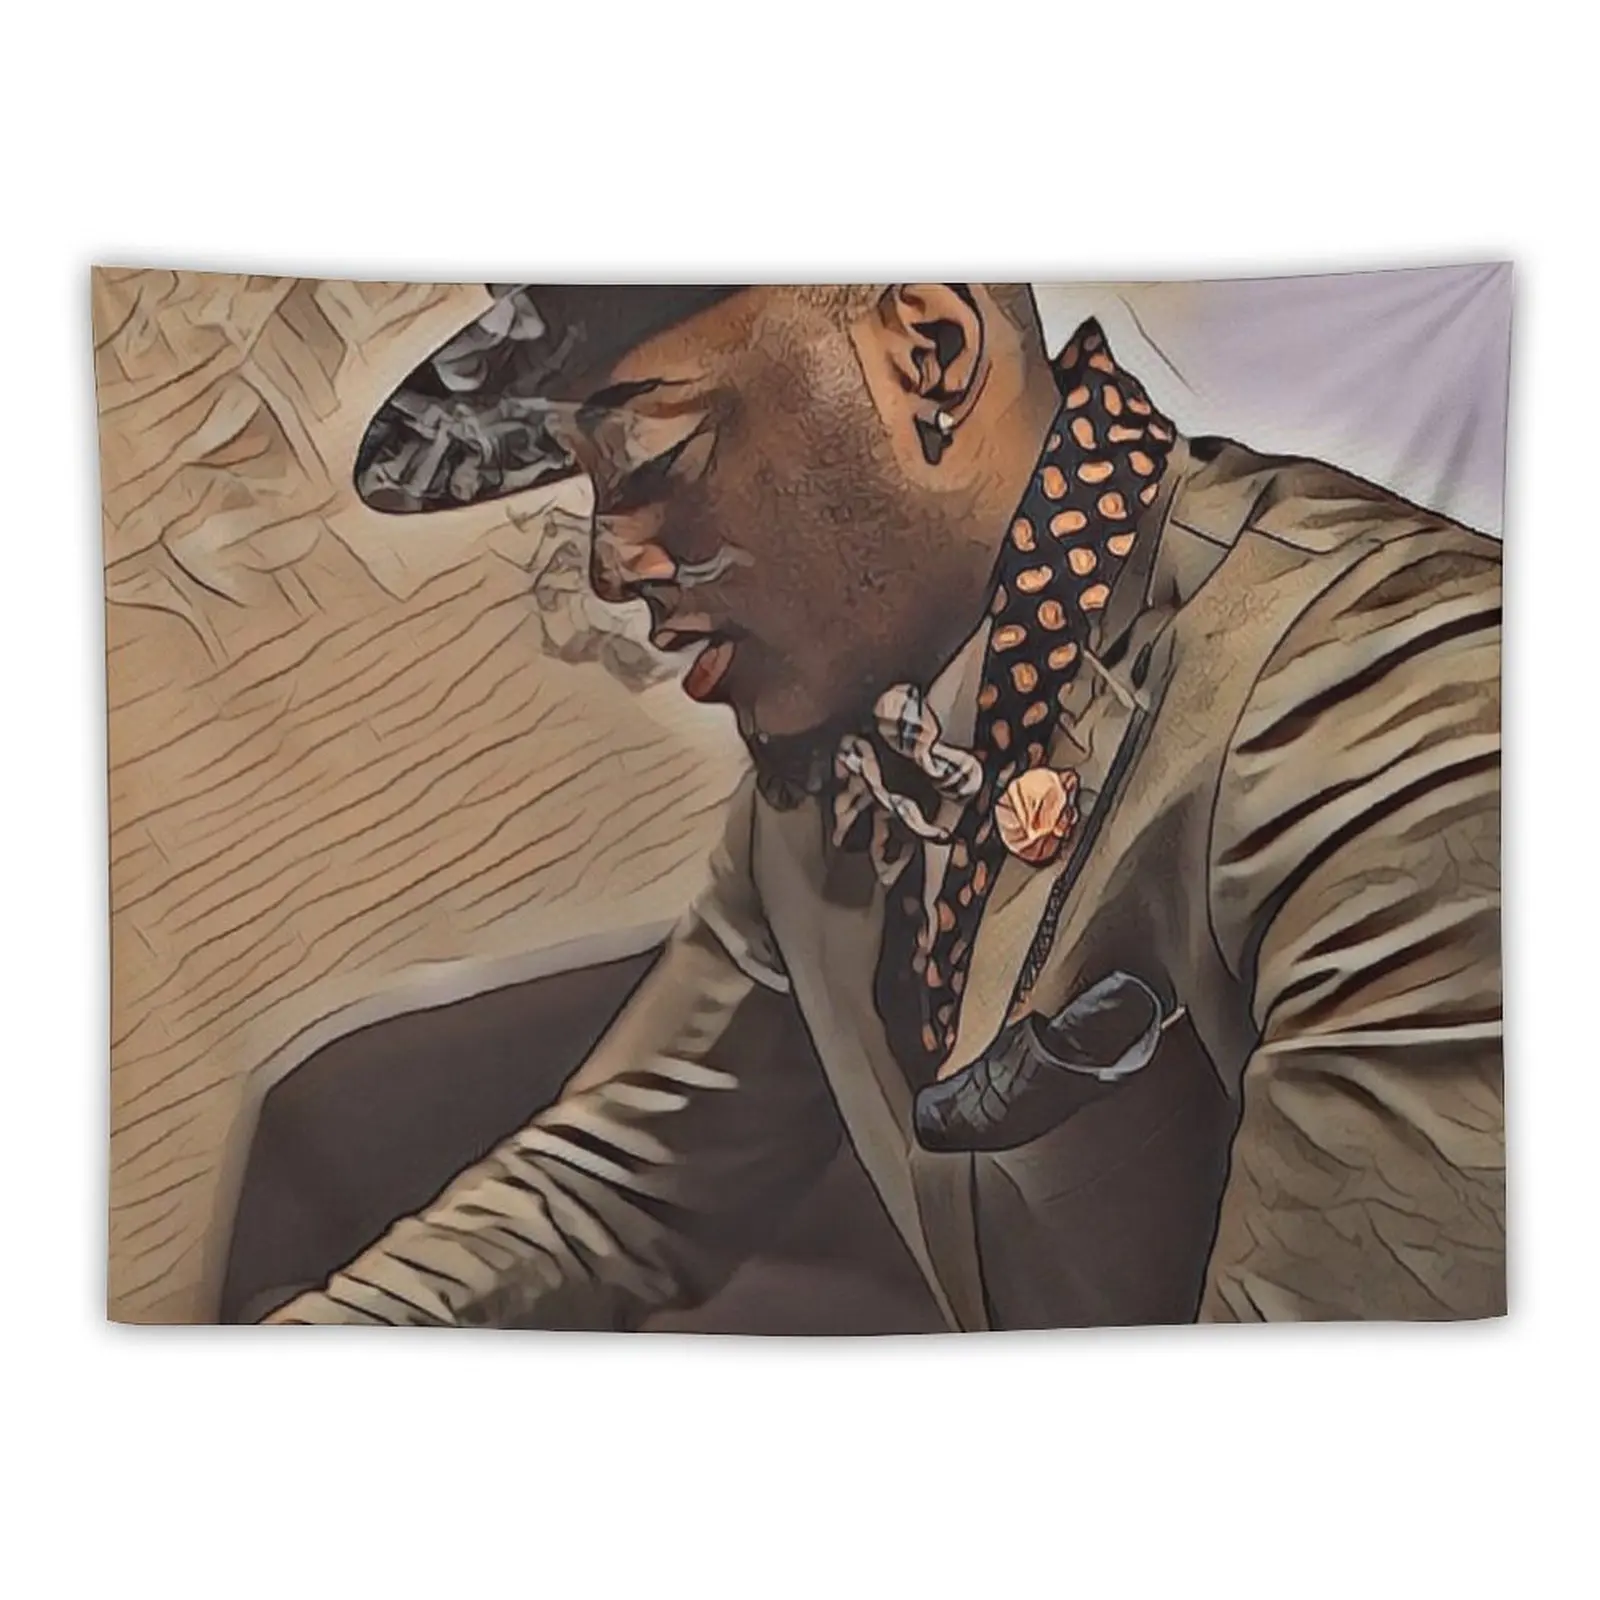 

Gangsta Tapestry Wall Tapestries Bedrooms Decorations Tapestrys Wall Hanging Decor